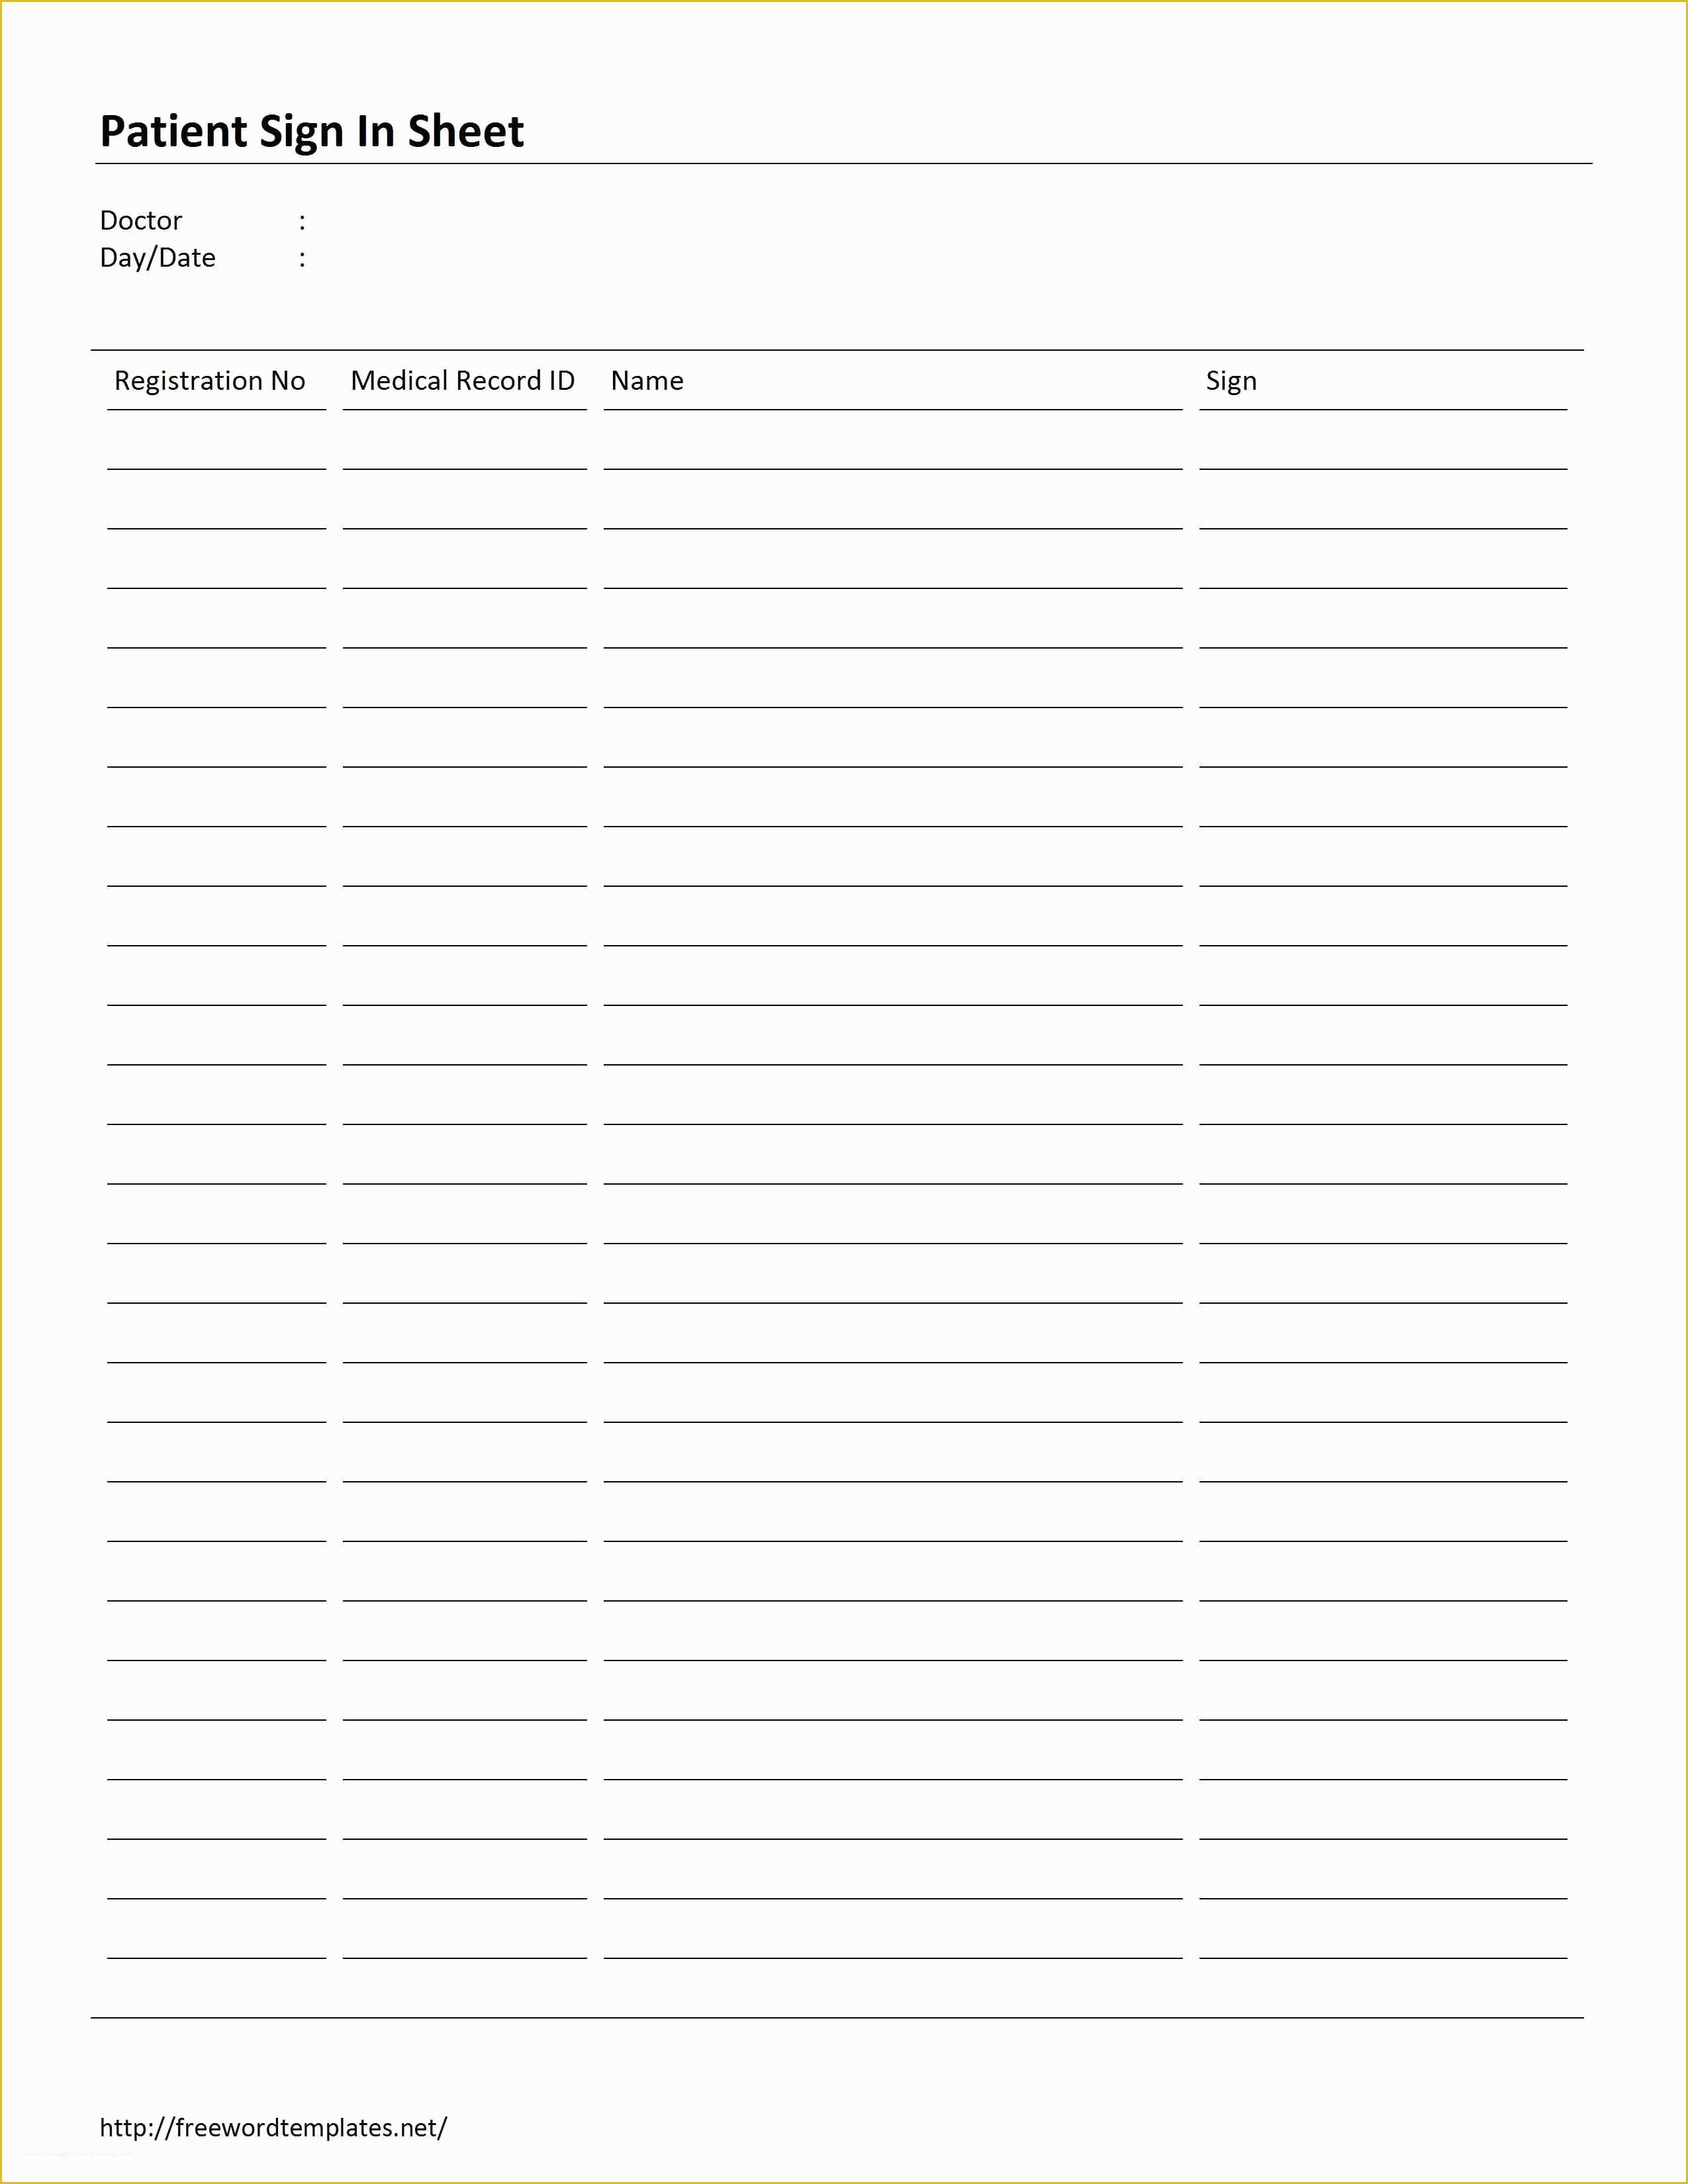 Patient Sign In Sheet Template Free Of Patient Sign In Sheet Template